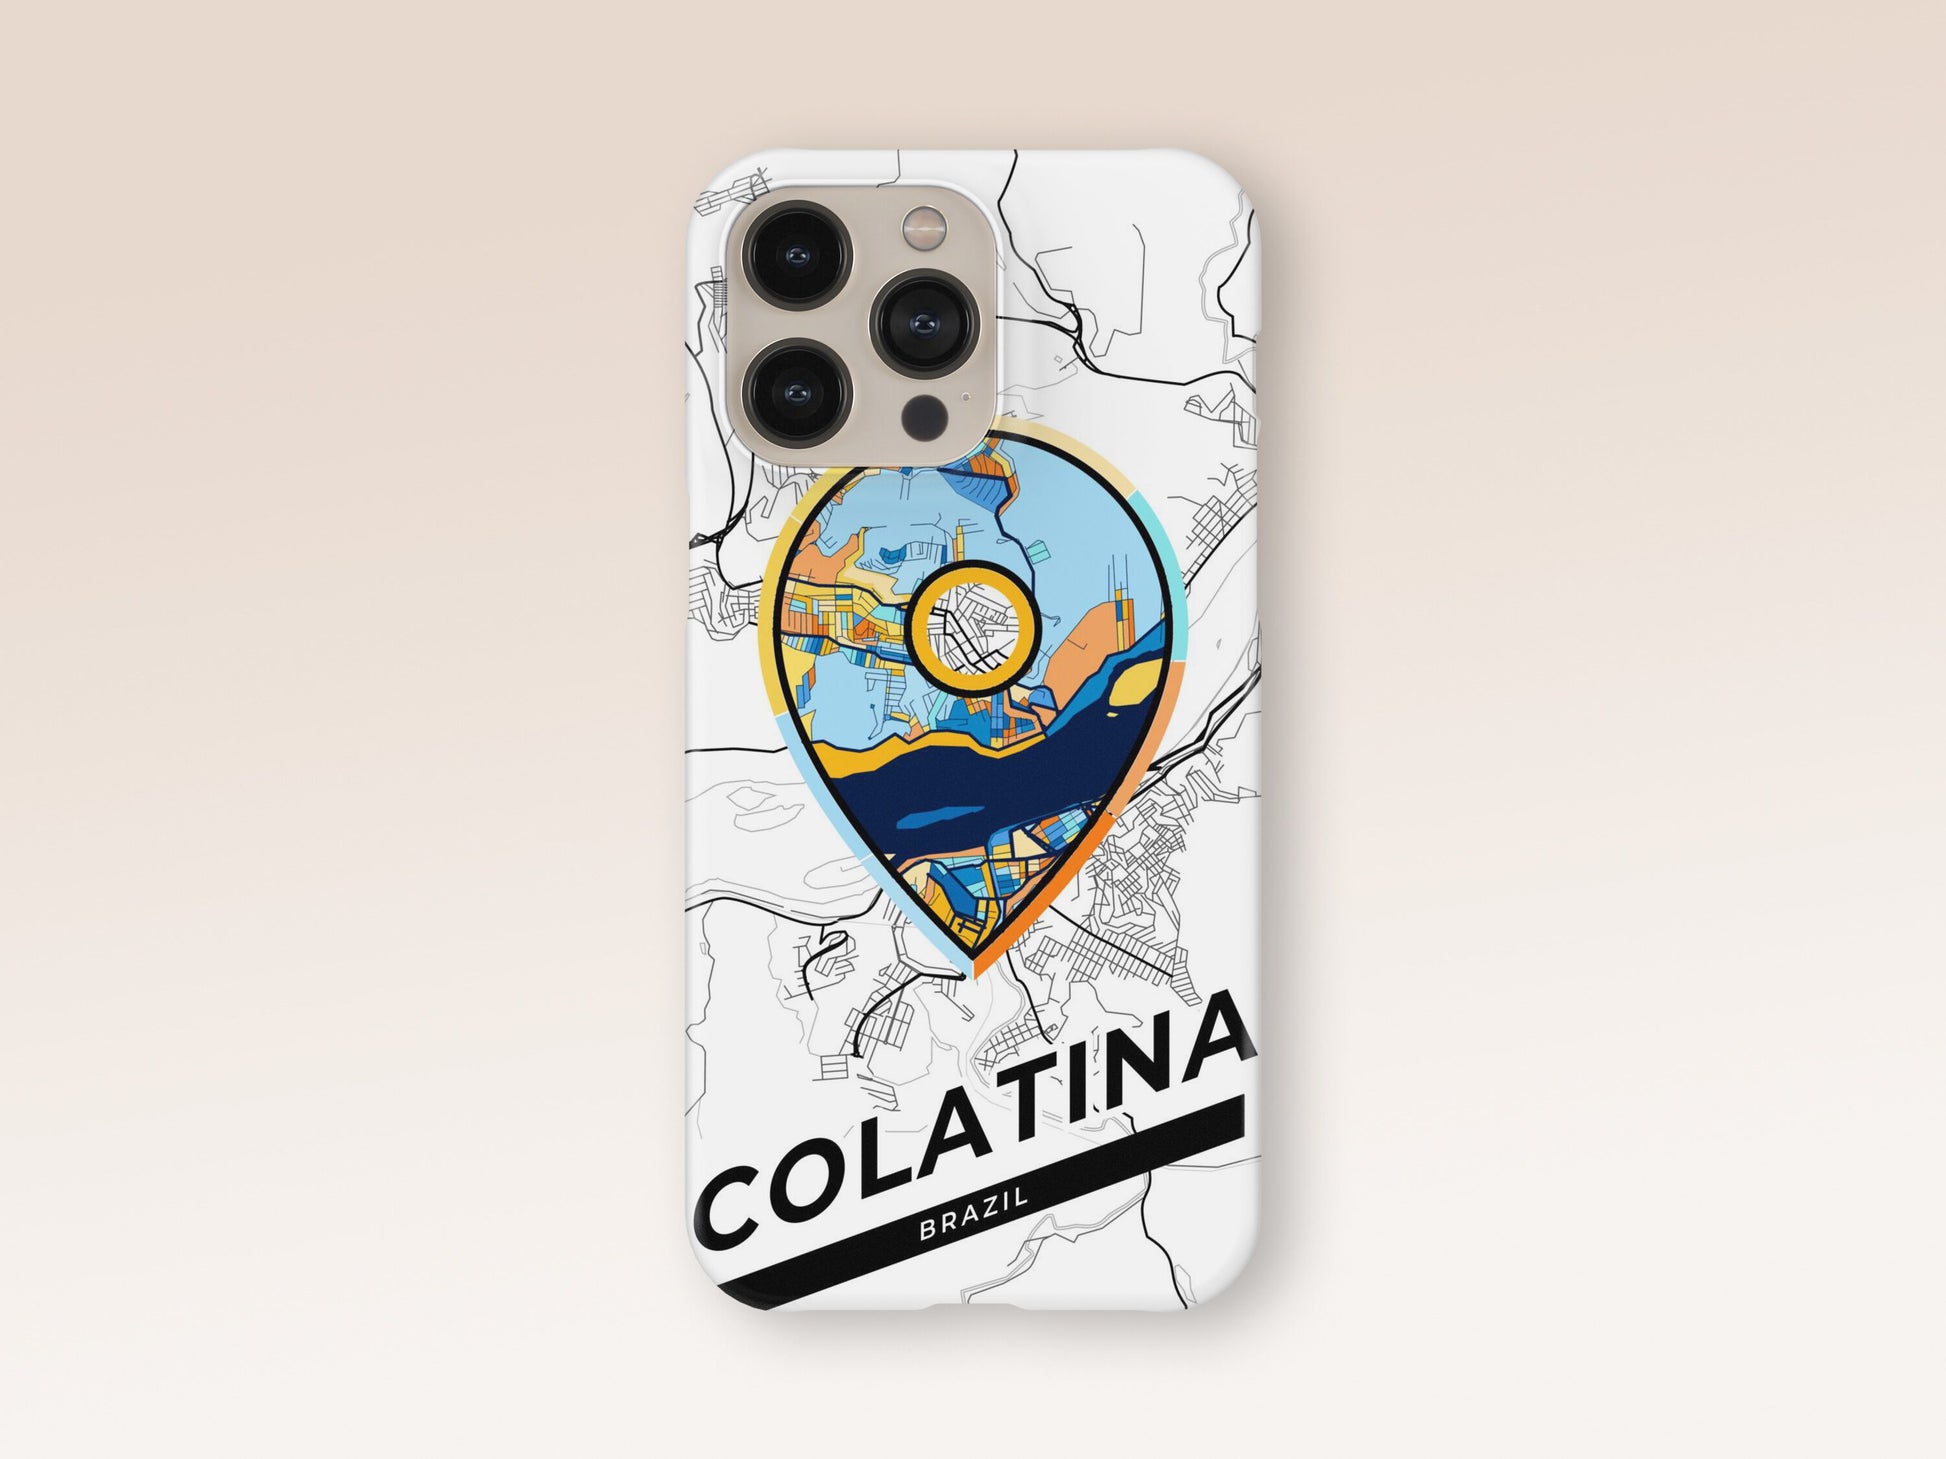 Colatina Brazil slim phone case with colorful icon. Birthday, wedding or housewarming gift. Couple match cases. 1